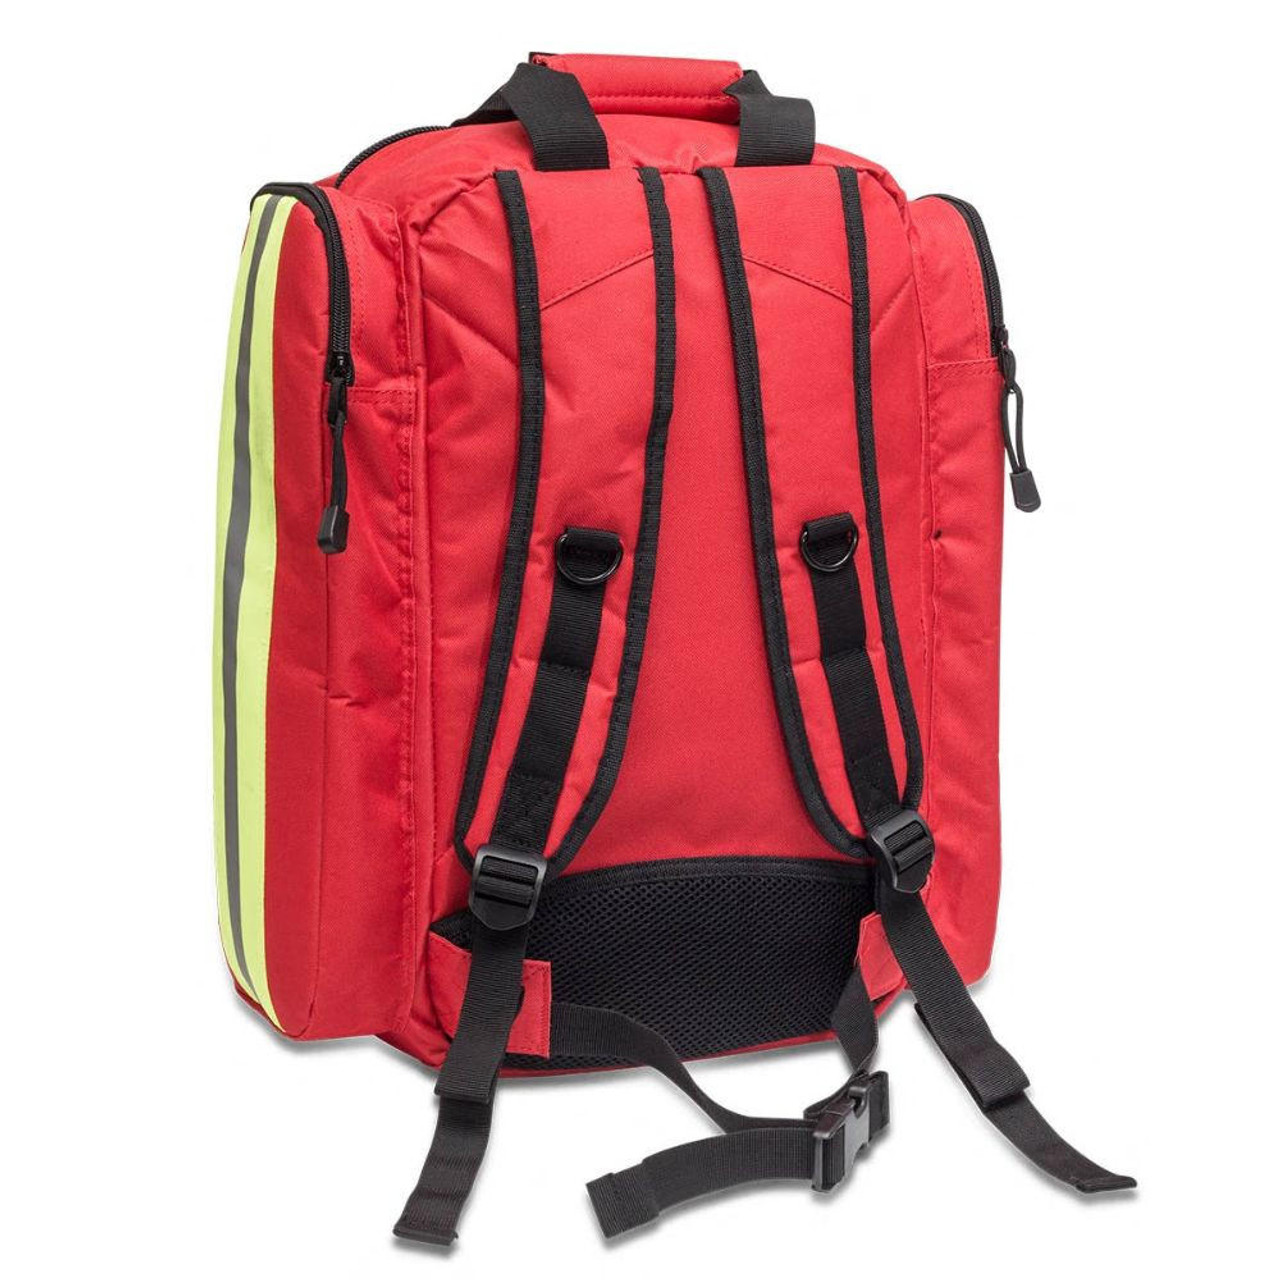  Medical First Aid Backpack for Emergency Response Red Polyester 29 Litre 